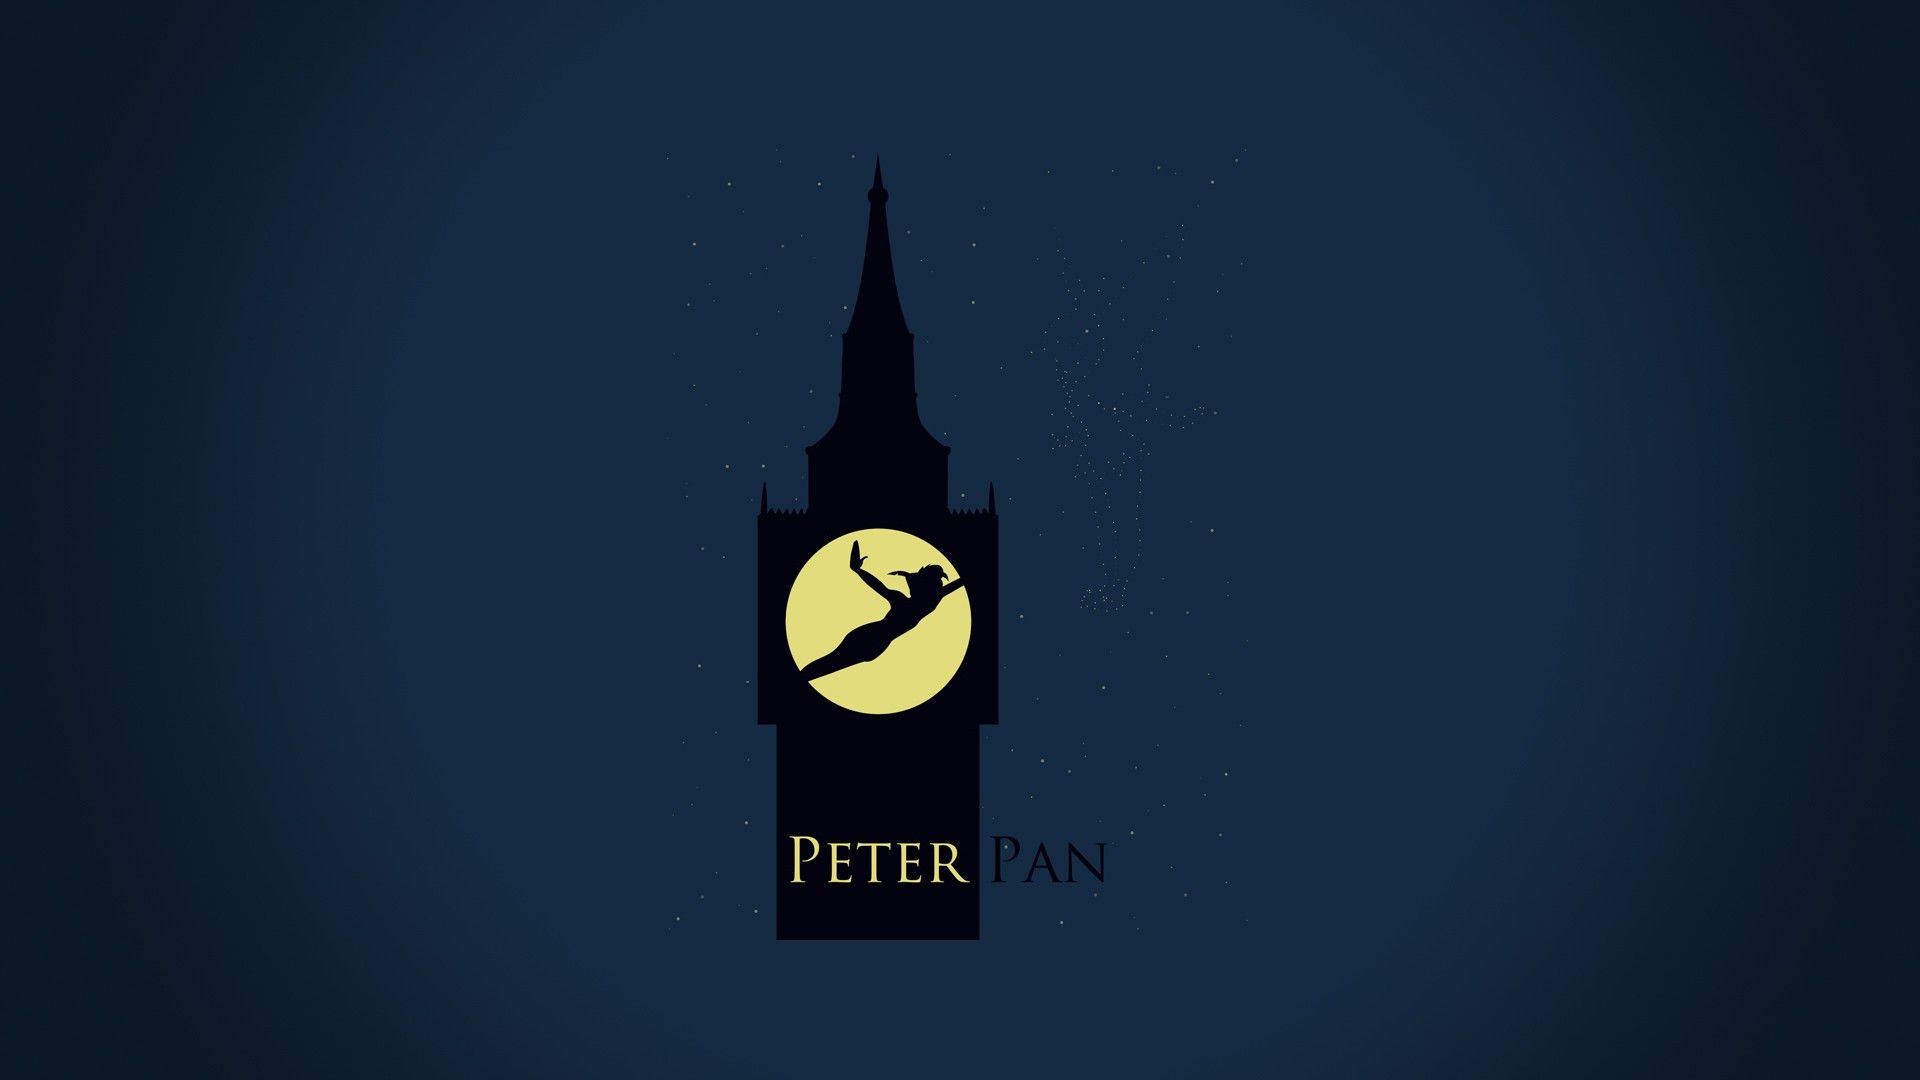 Free download Related Picture download peter pan iphone wallpaper